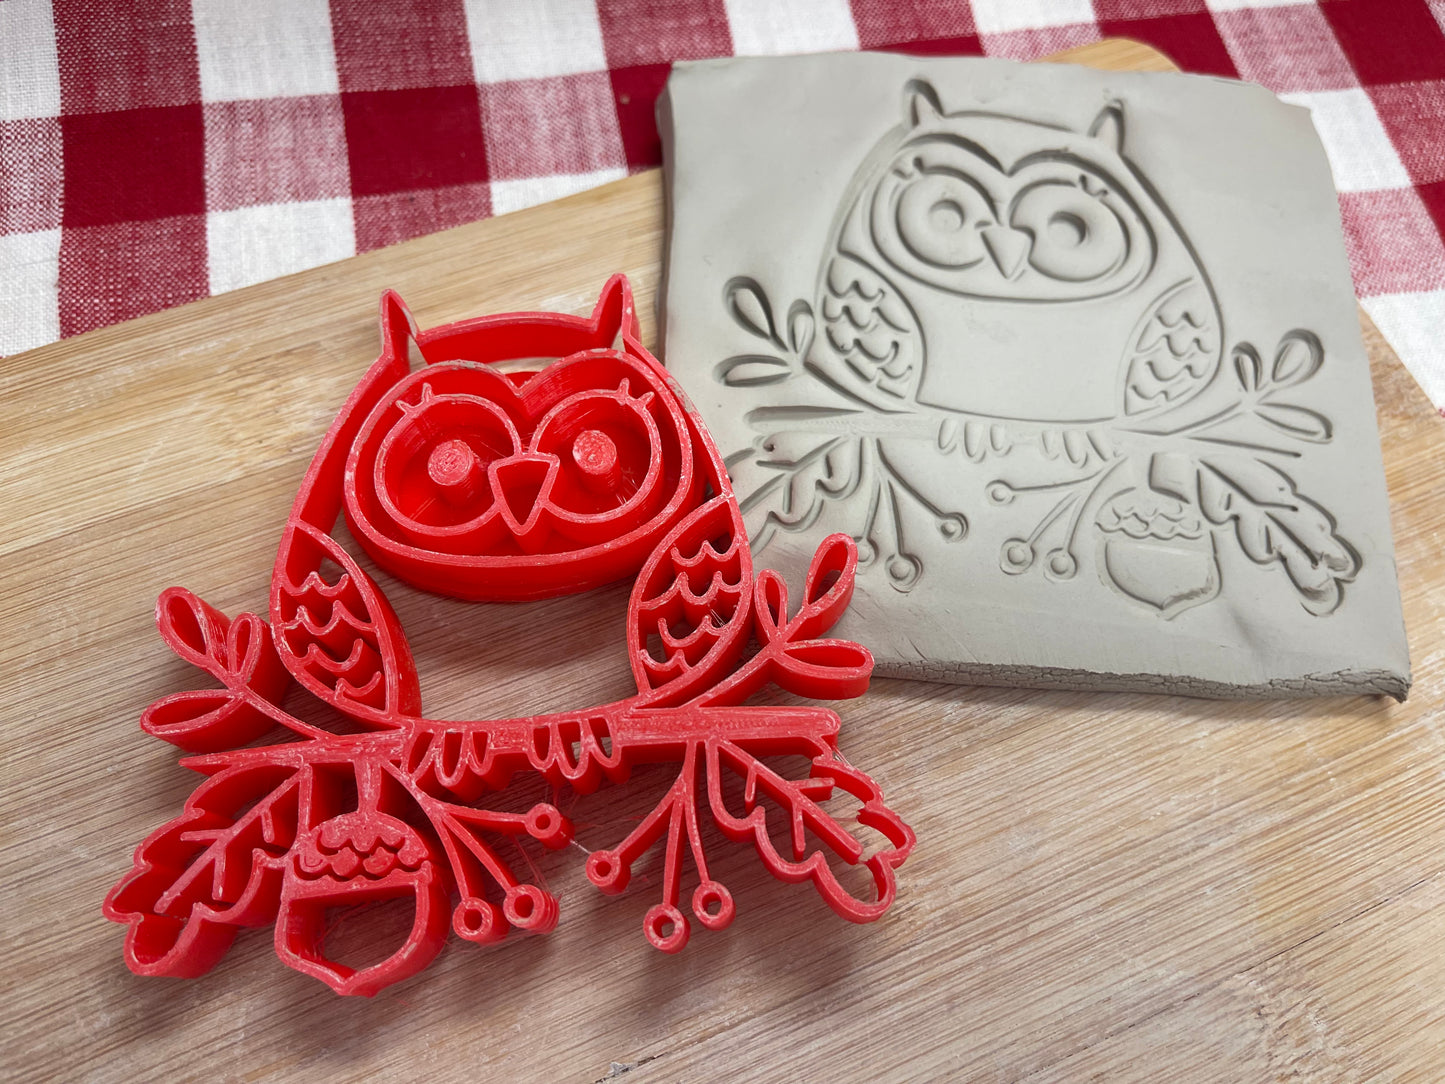 Autumn Stamp Series - Autumn Owl with Leaves stamp, plastic 3D printed,  multiple sizes